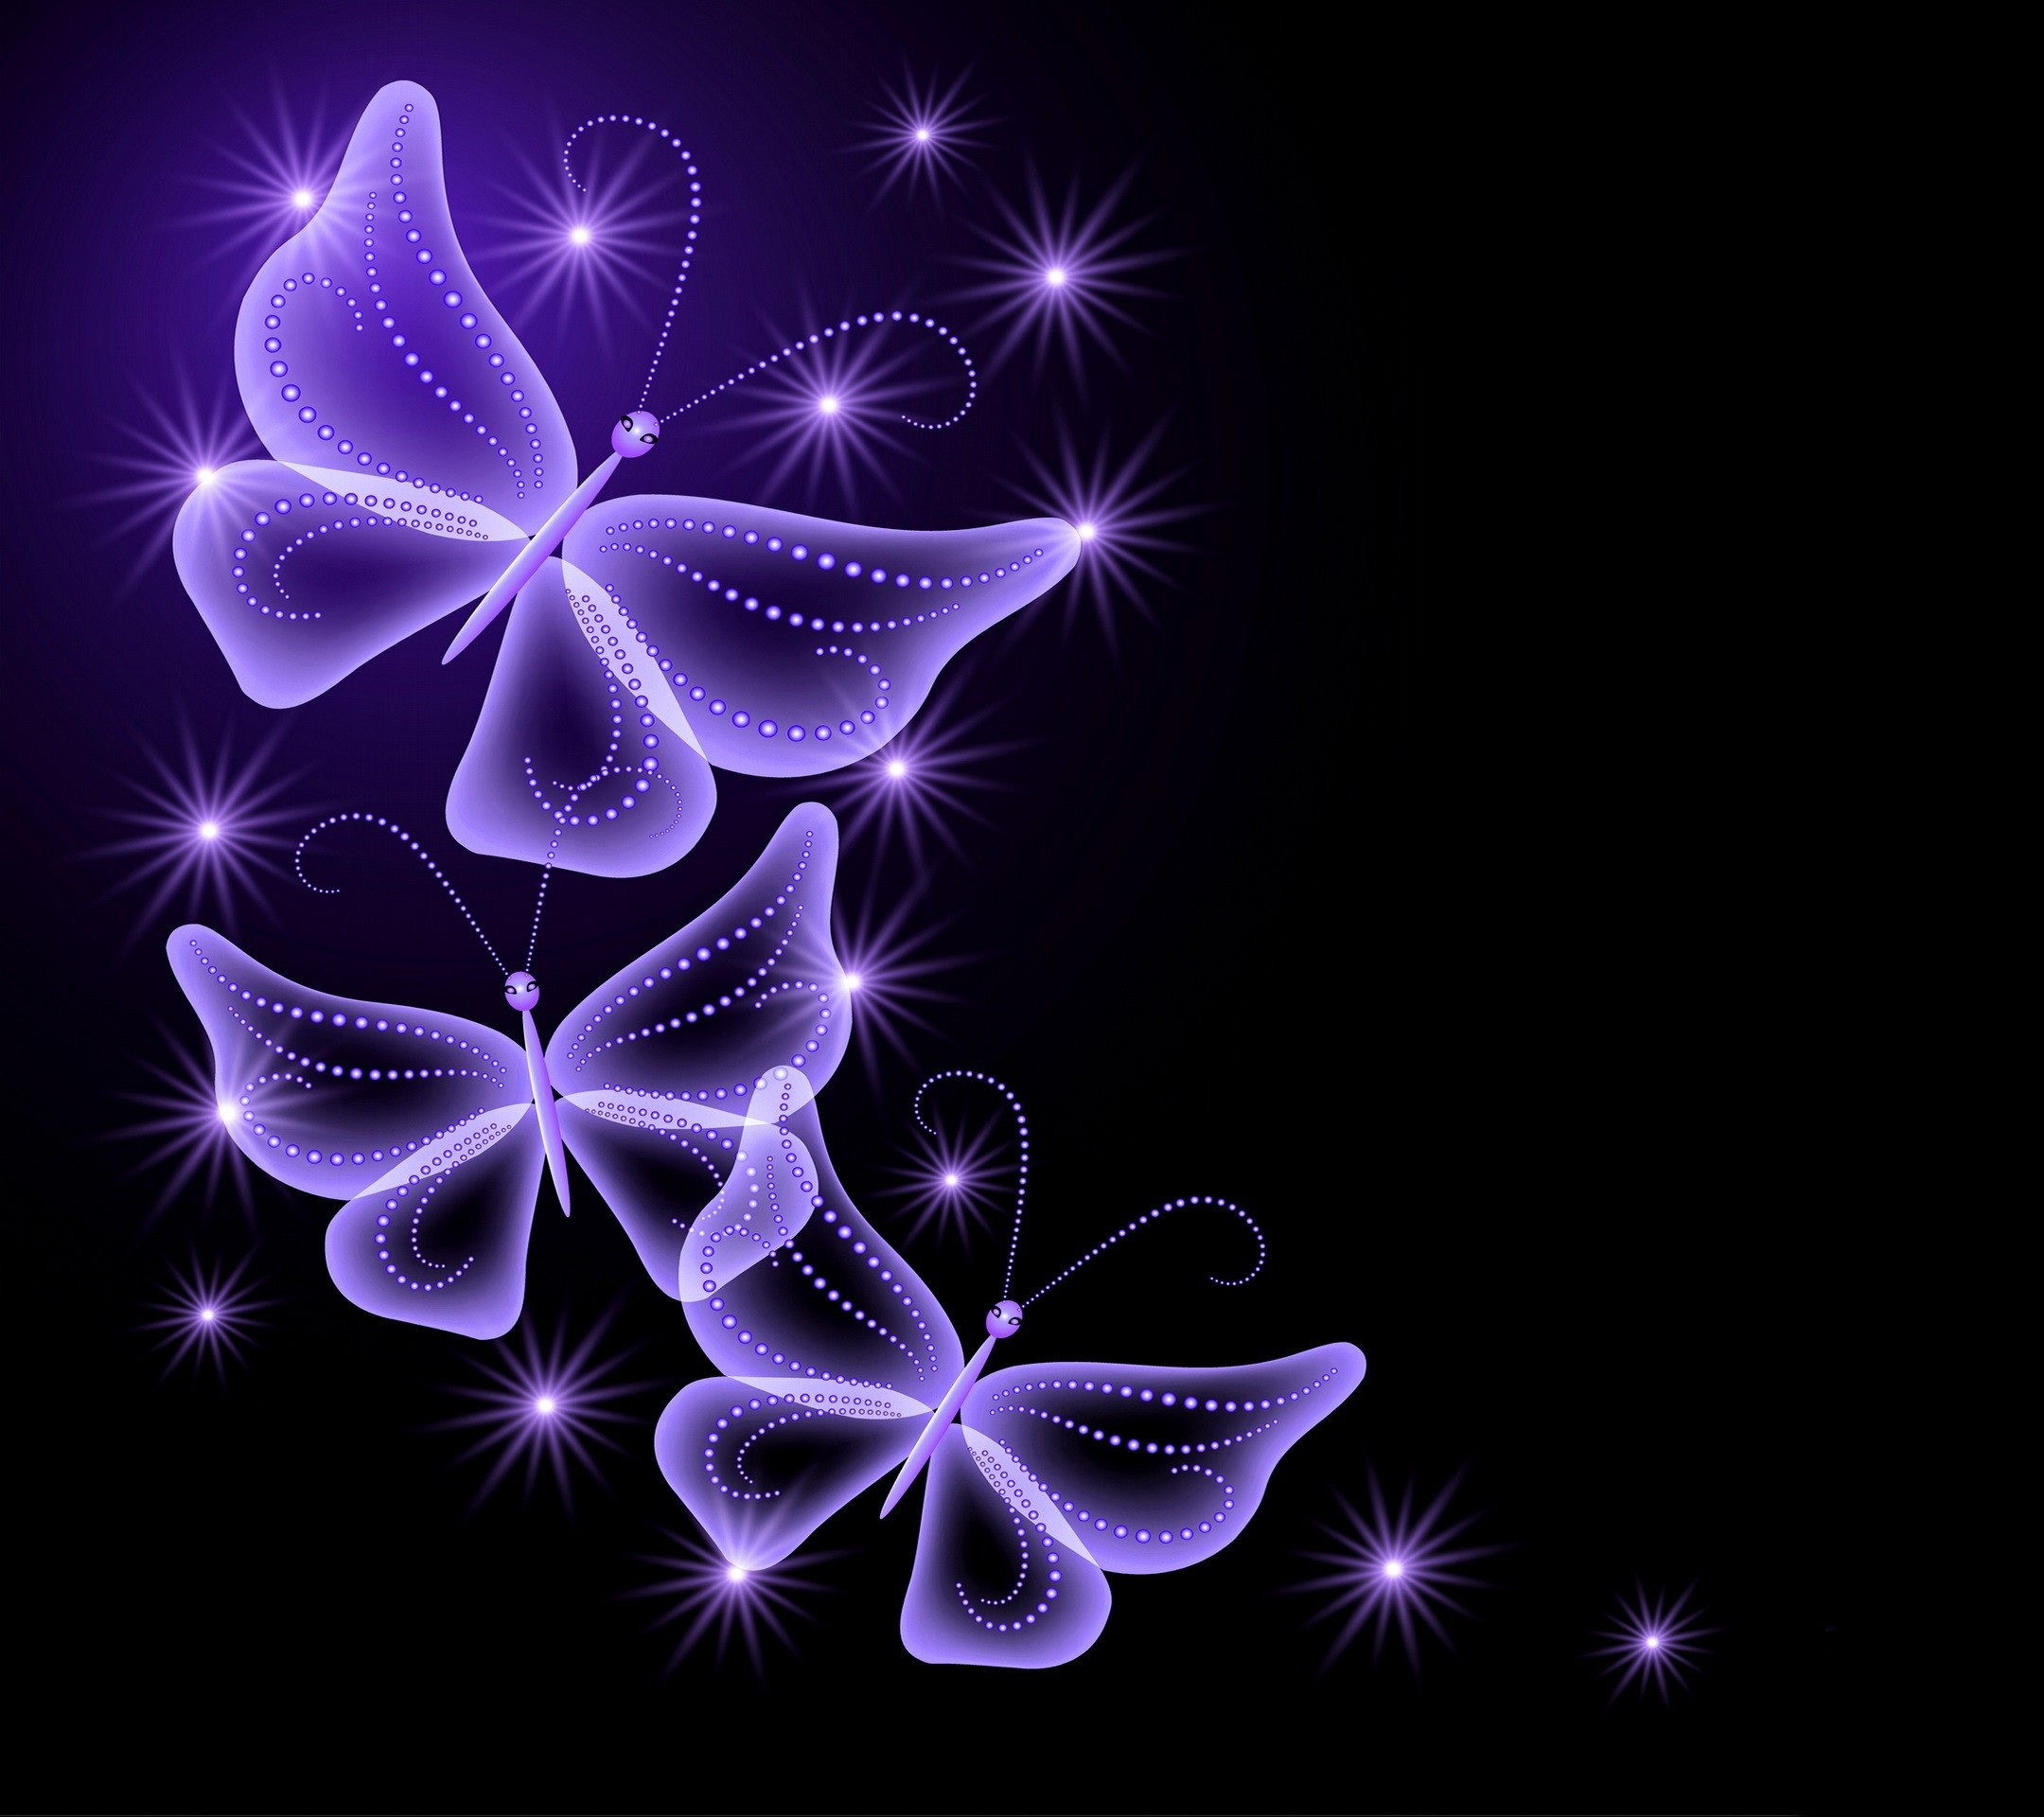 Black Butterfly Background Image